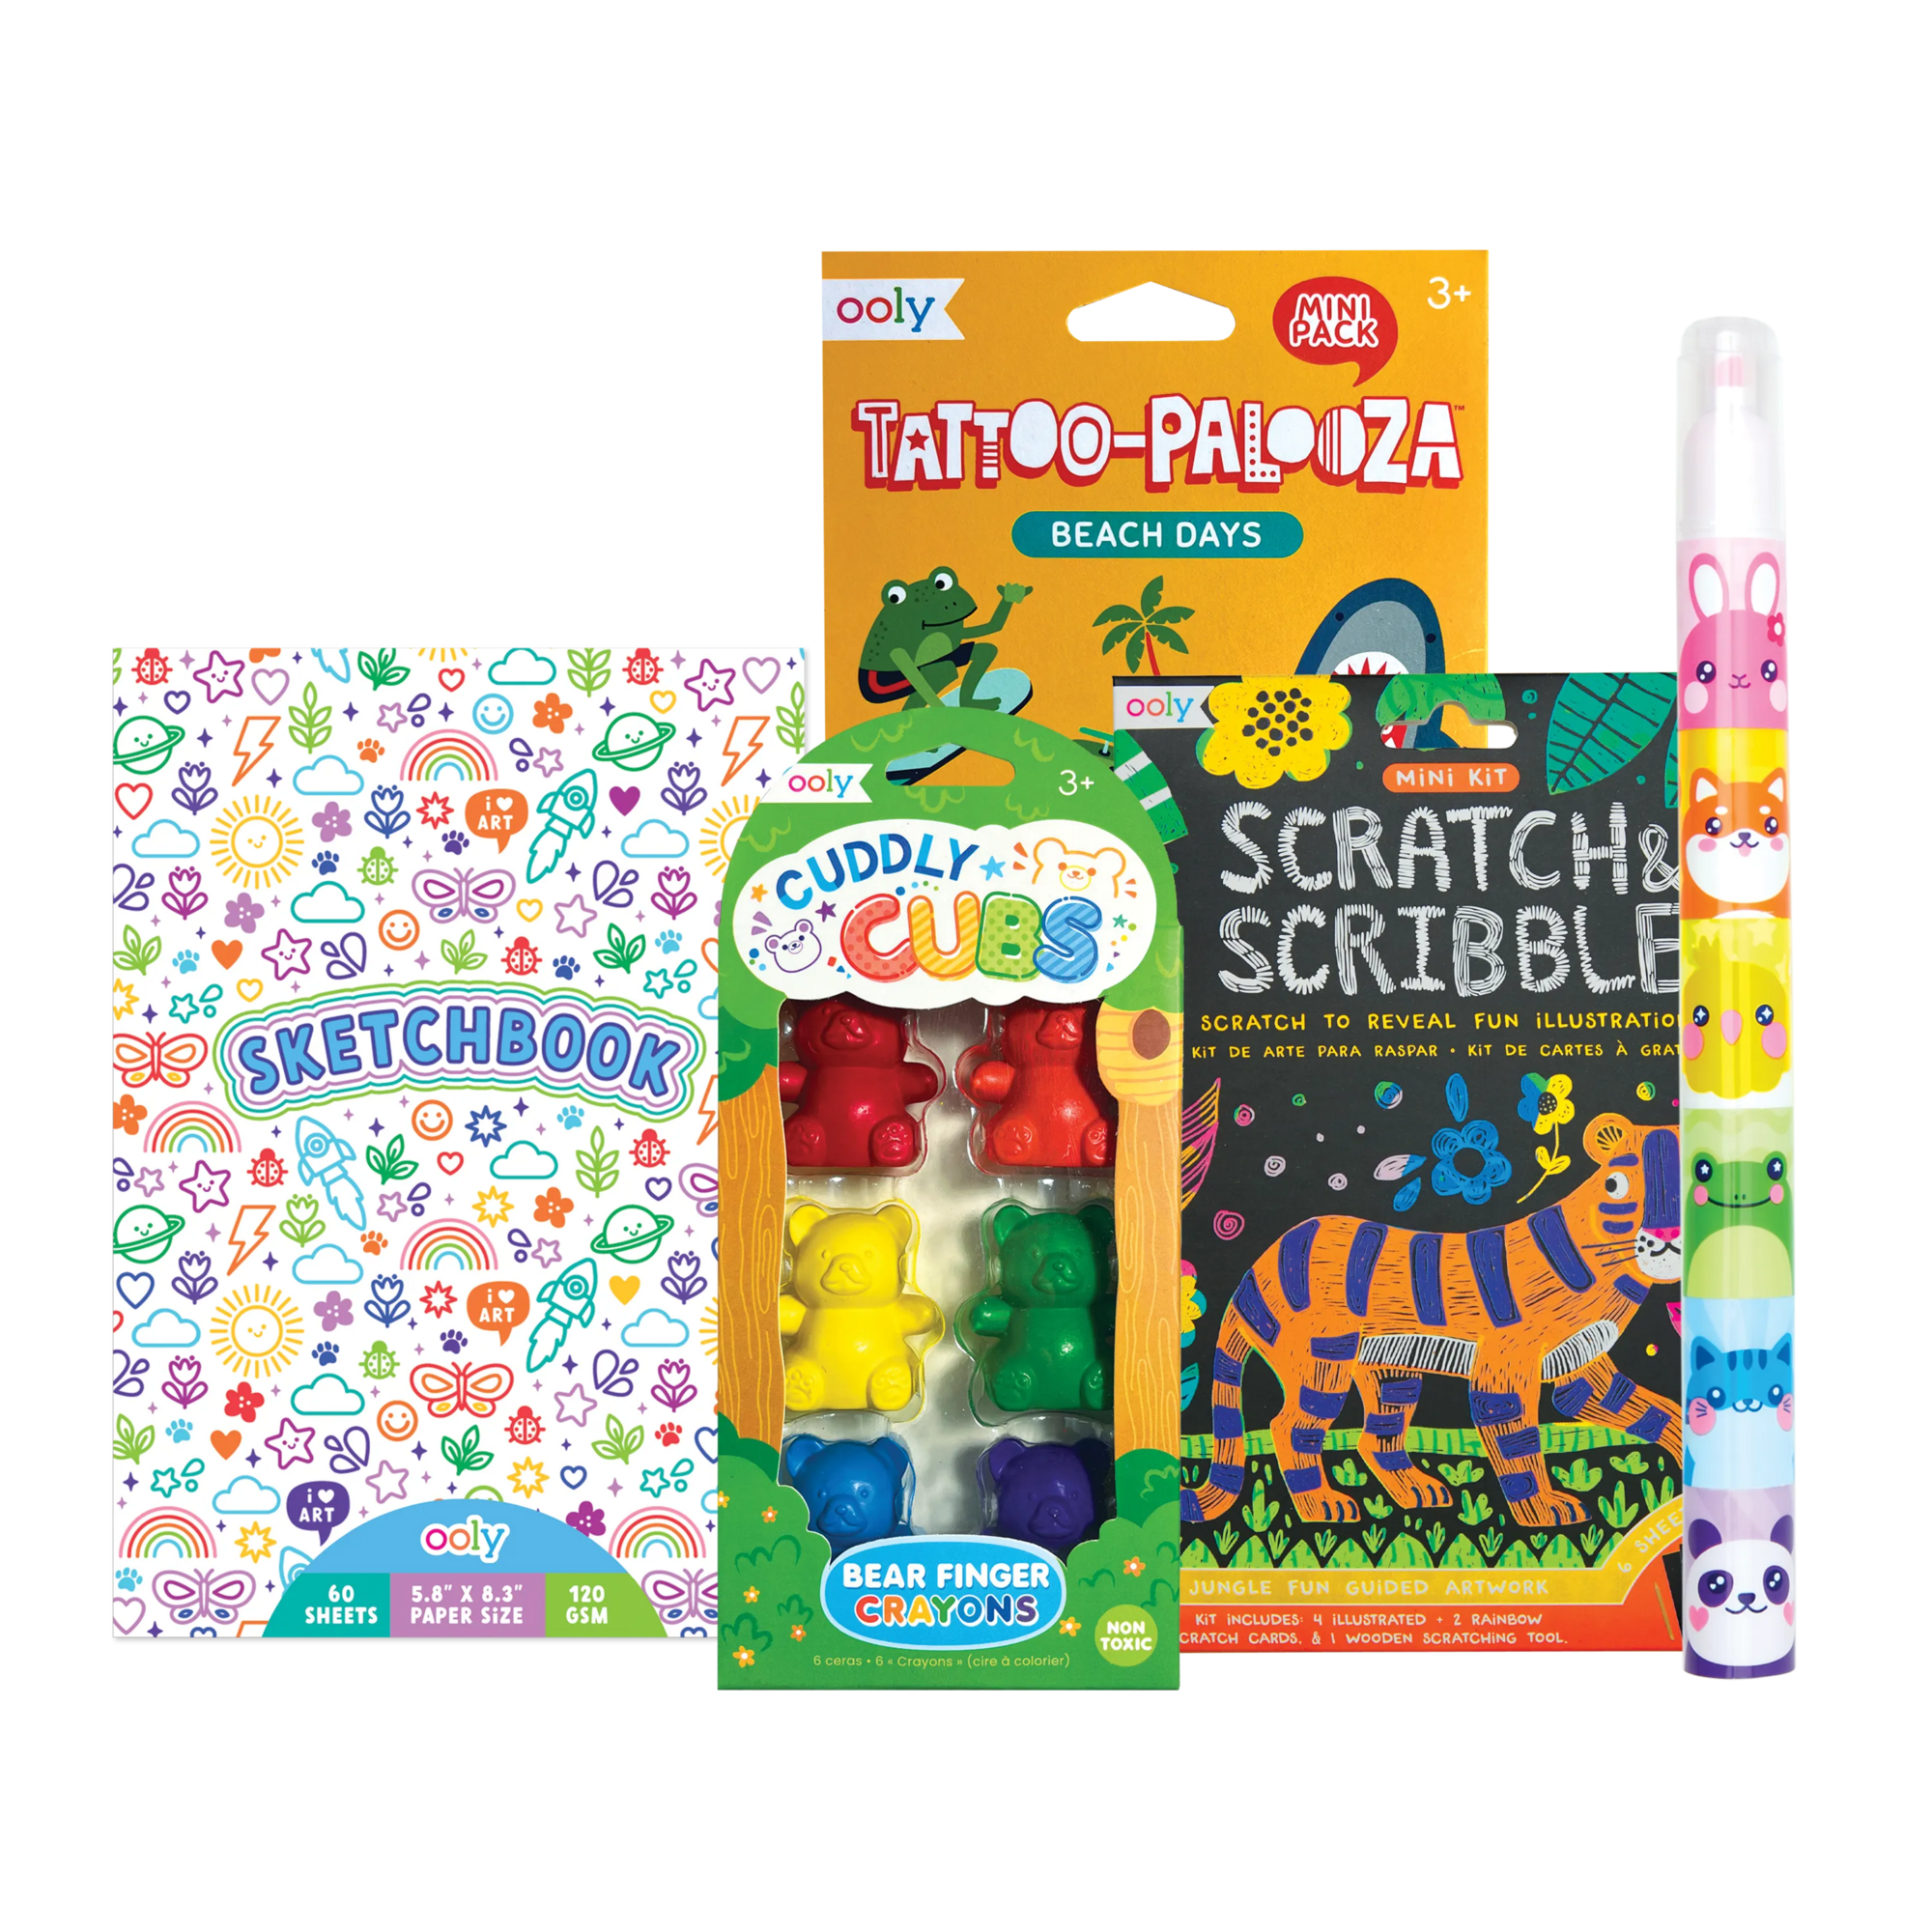 World of Doodles Happy Pack Gift Set out of gift packaging